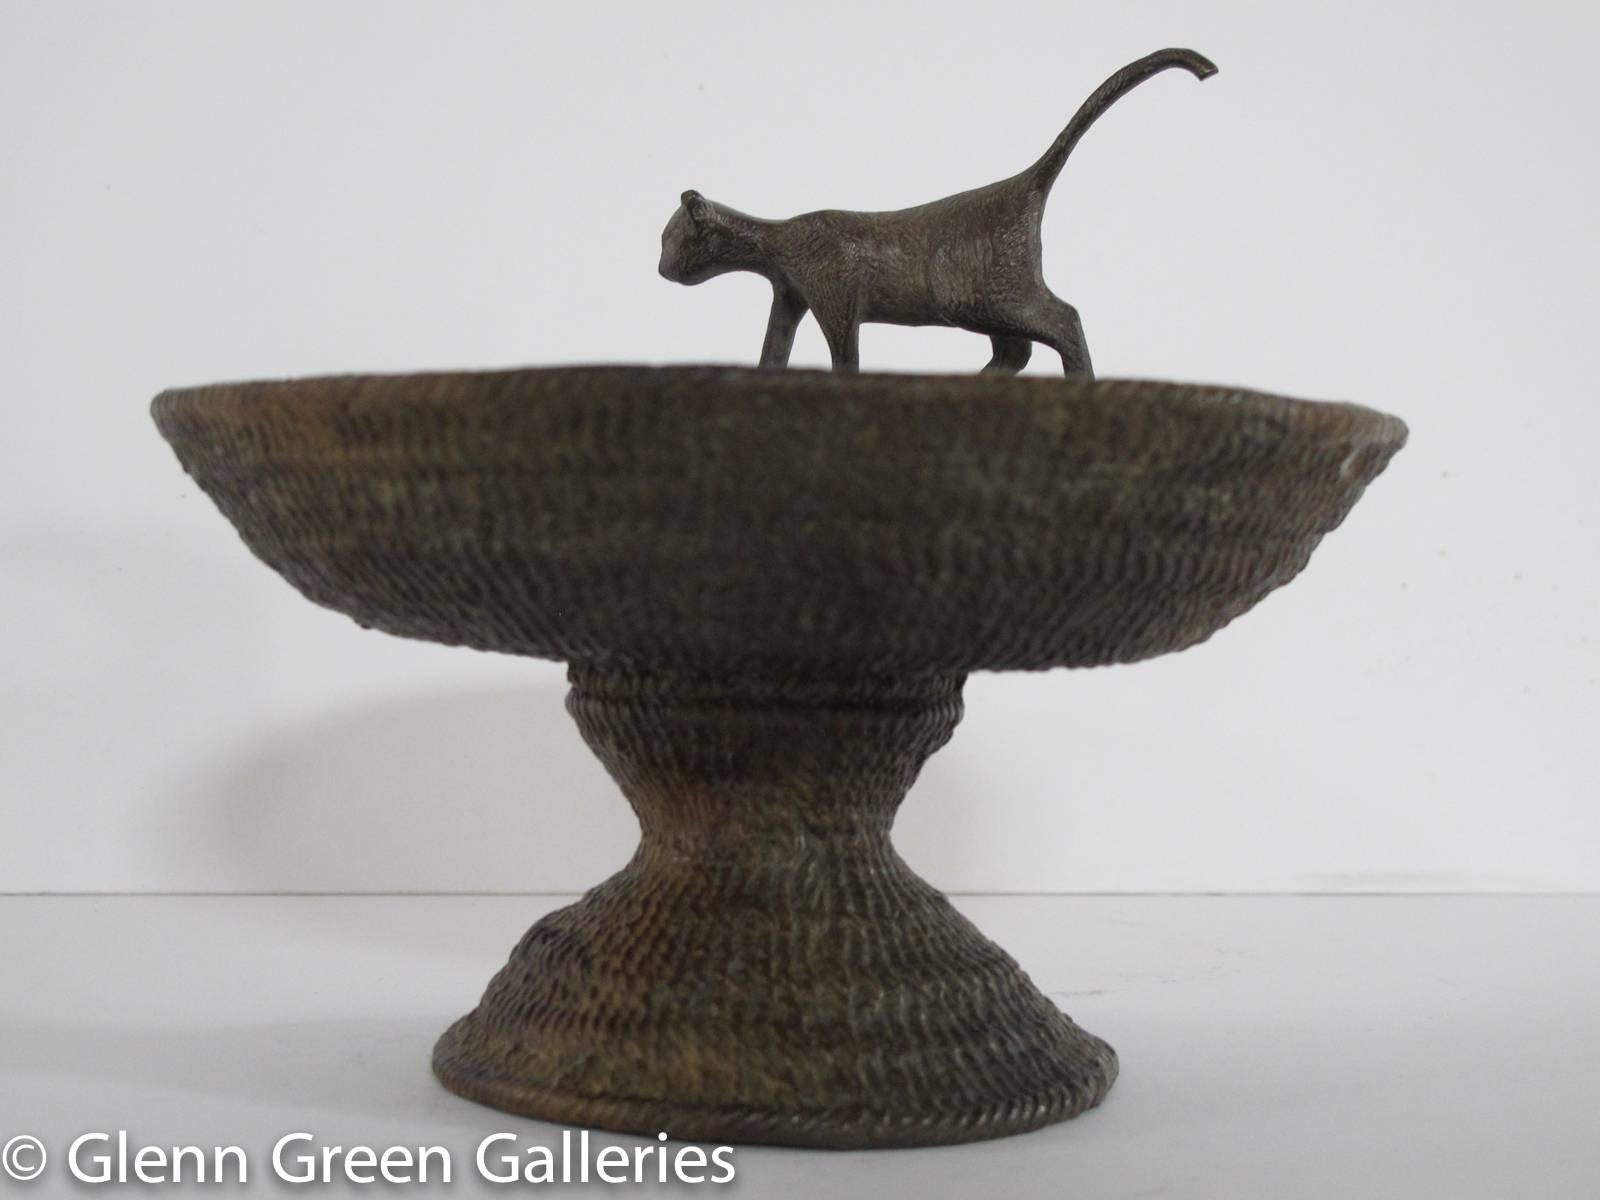 Cat on Basket - Contemporary Sculpture by Peter Woytuk